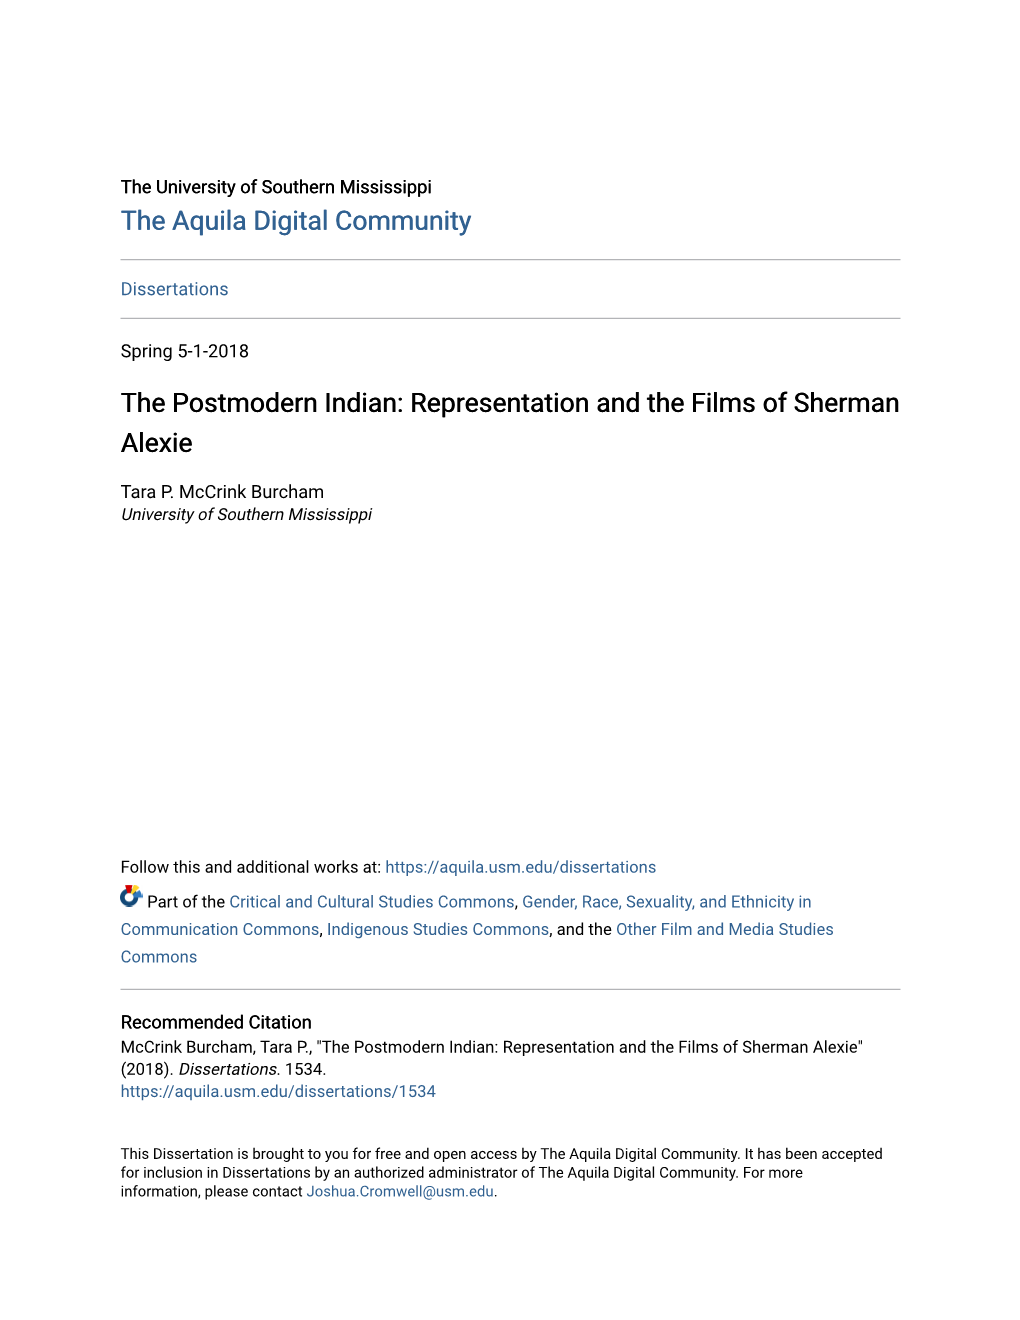 The Postmodern Indian: Representation and the Films of Sherman Alexie